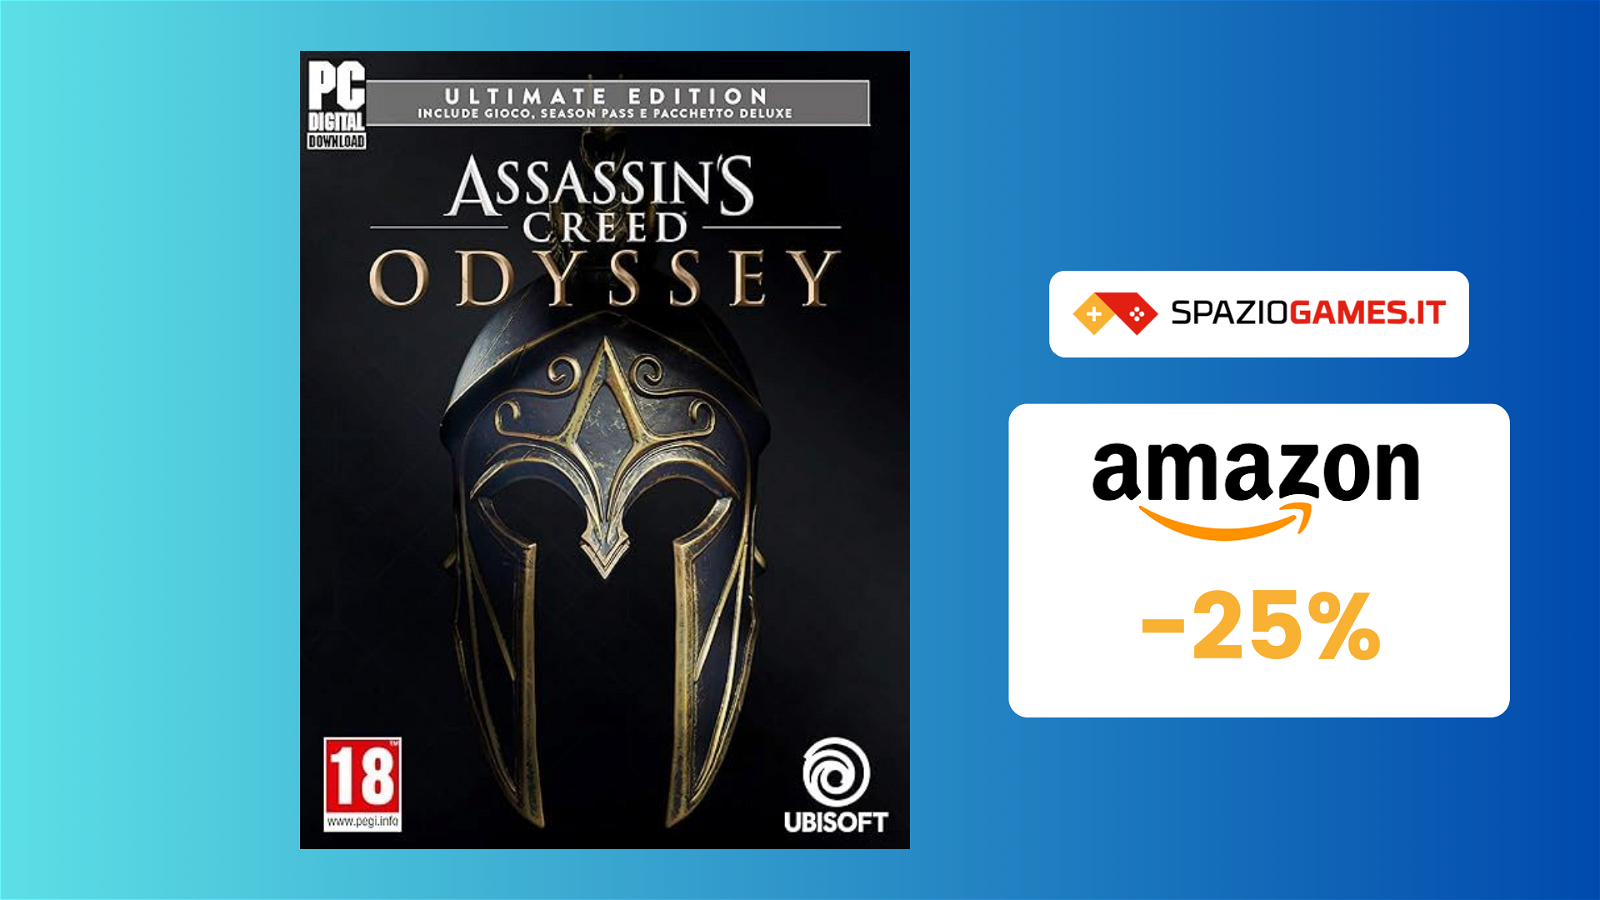 Assassin's Creed Odyssey - Ultimate Edition per PC a 17€!